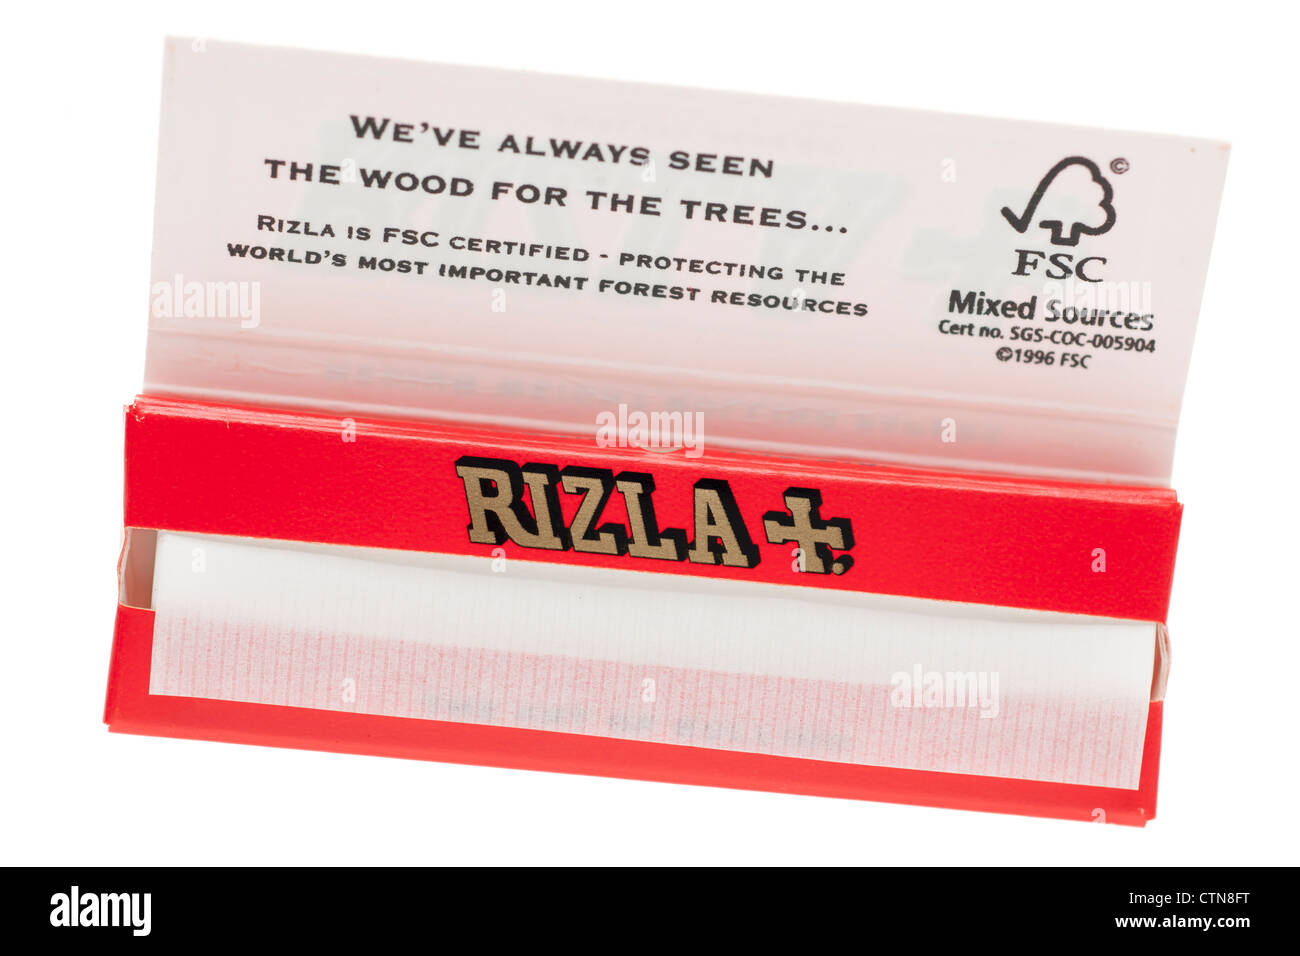 Packet of Rizla cigarette papers Stock Photo